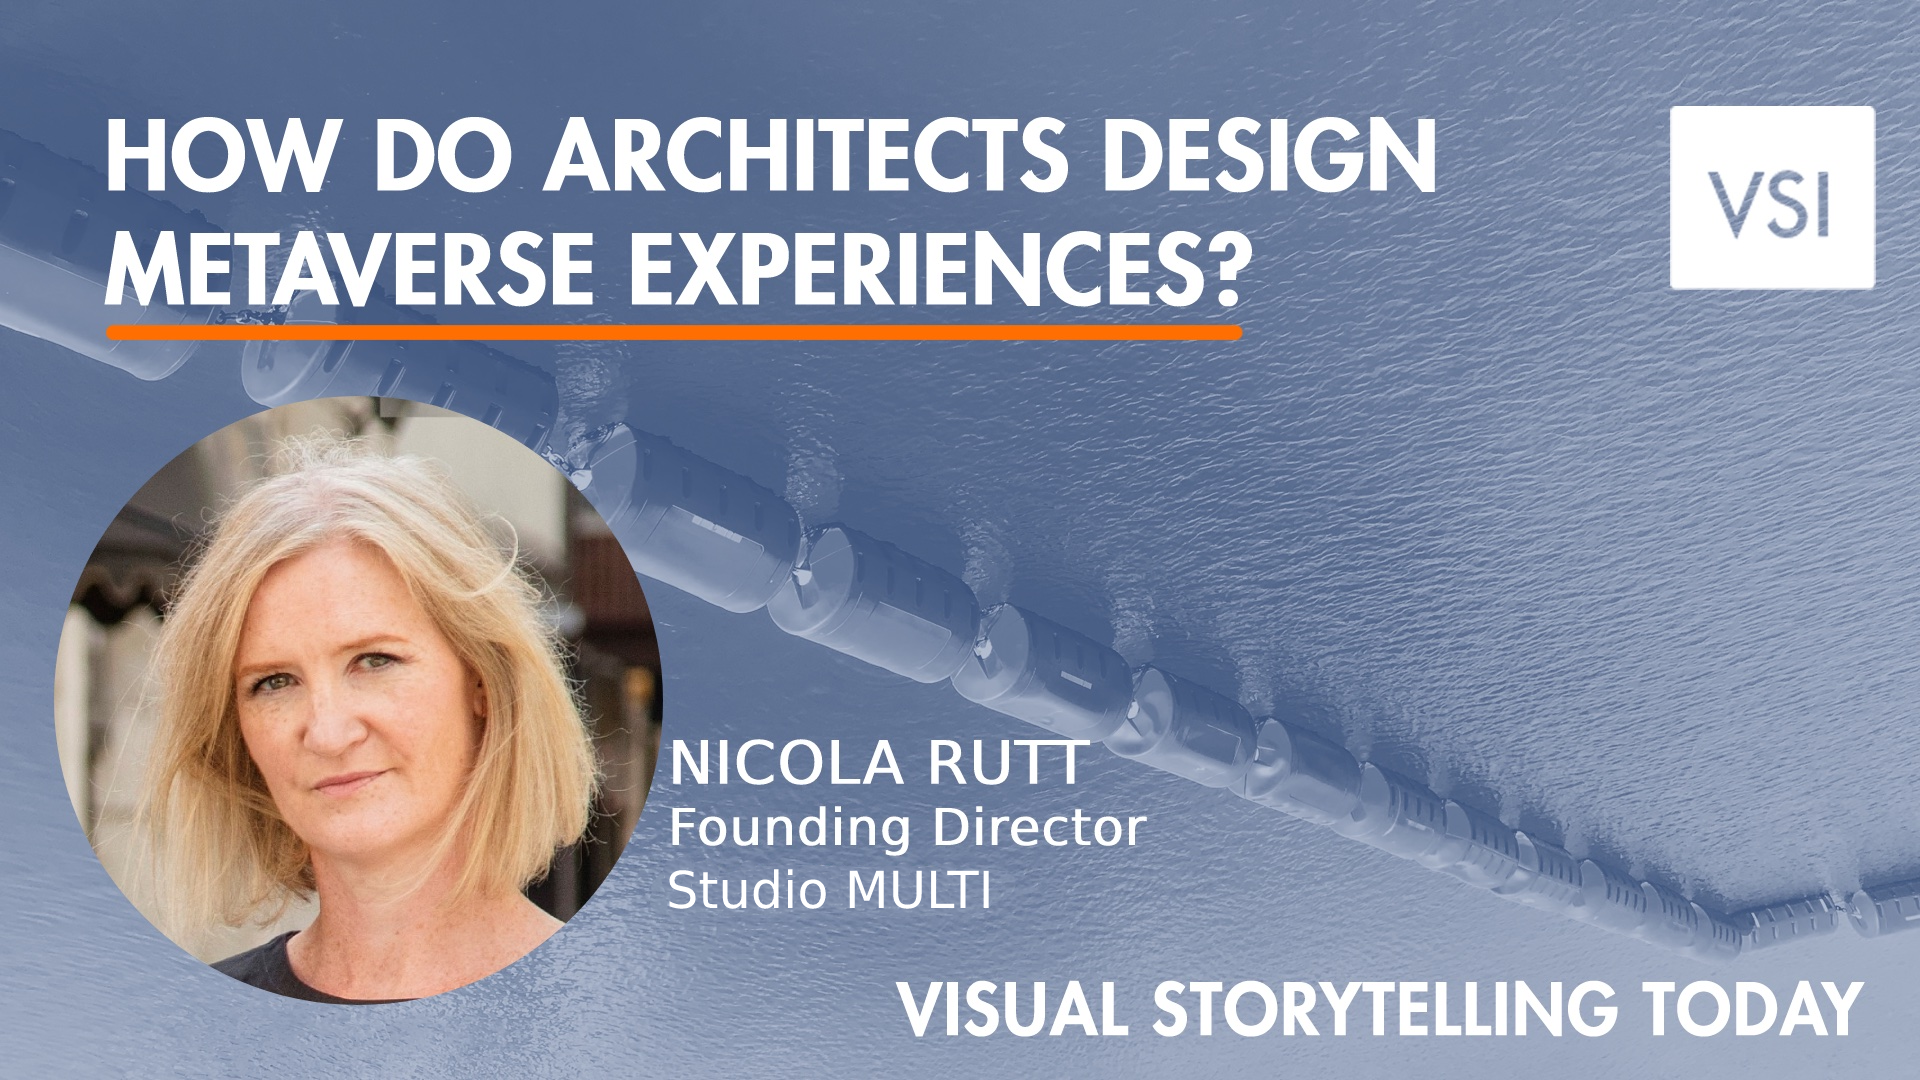 How Do Architects Design Metaverse Experiences?